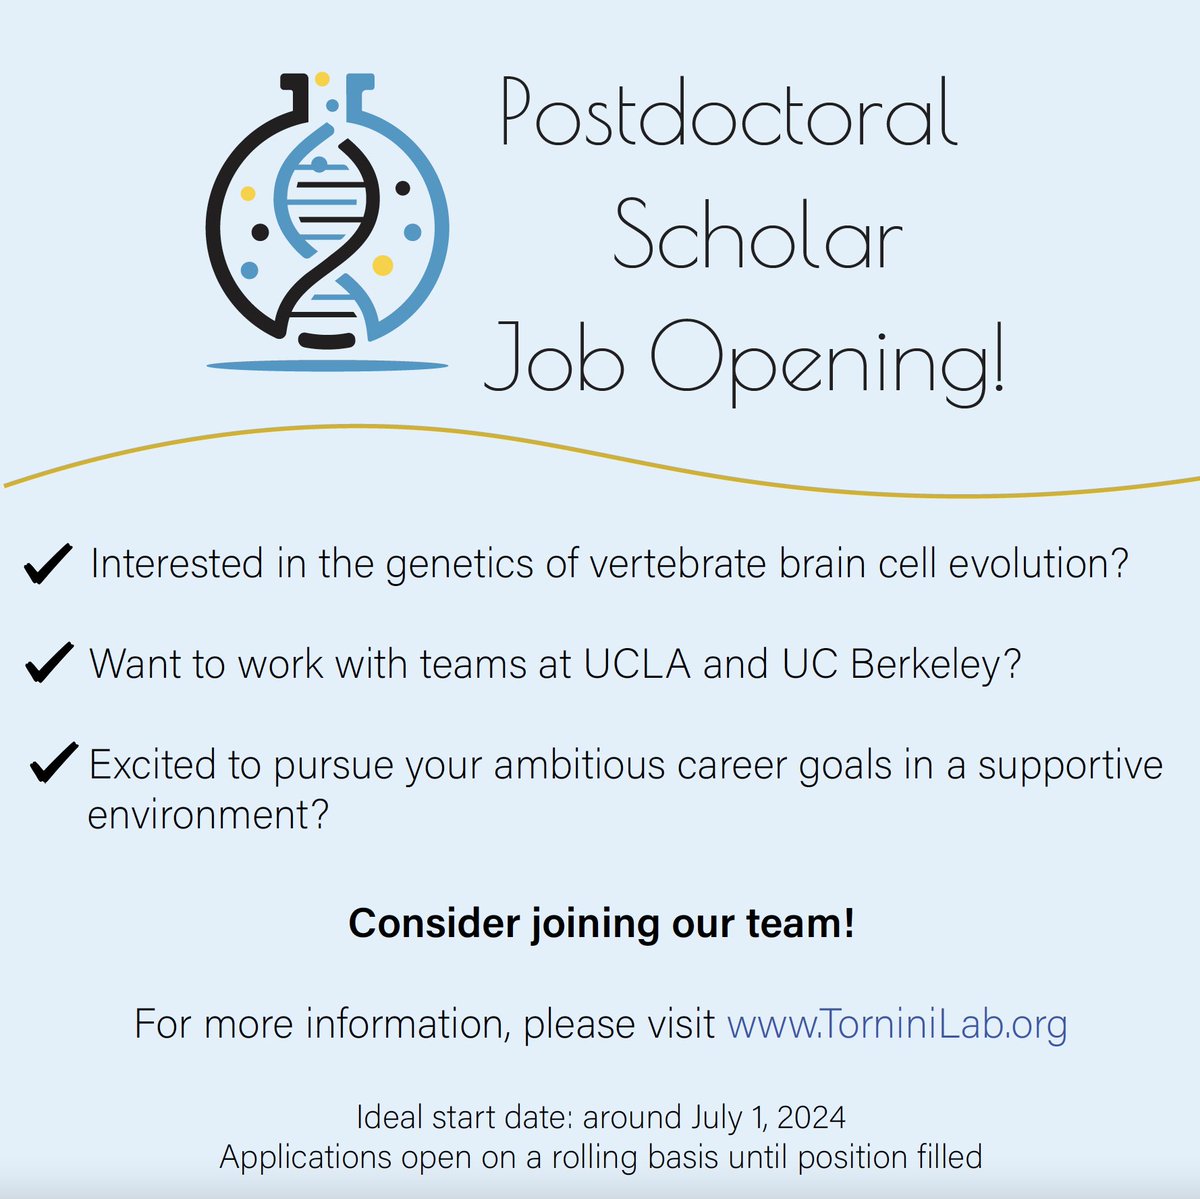 Our lab is actively recruiting a #postdoc to work with #zebrafish & sea #lamprey on the #genetics of vertebrate brain cell evolution! Based at UCLA, collaboration w/UC Berkeley. Job Description & Application Details available at TorniniLab.org. Reach out w/inquiries!